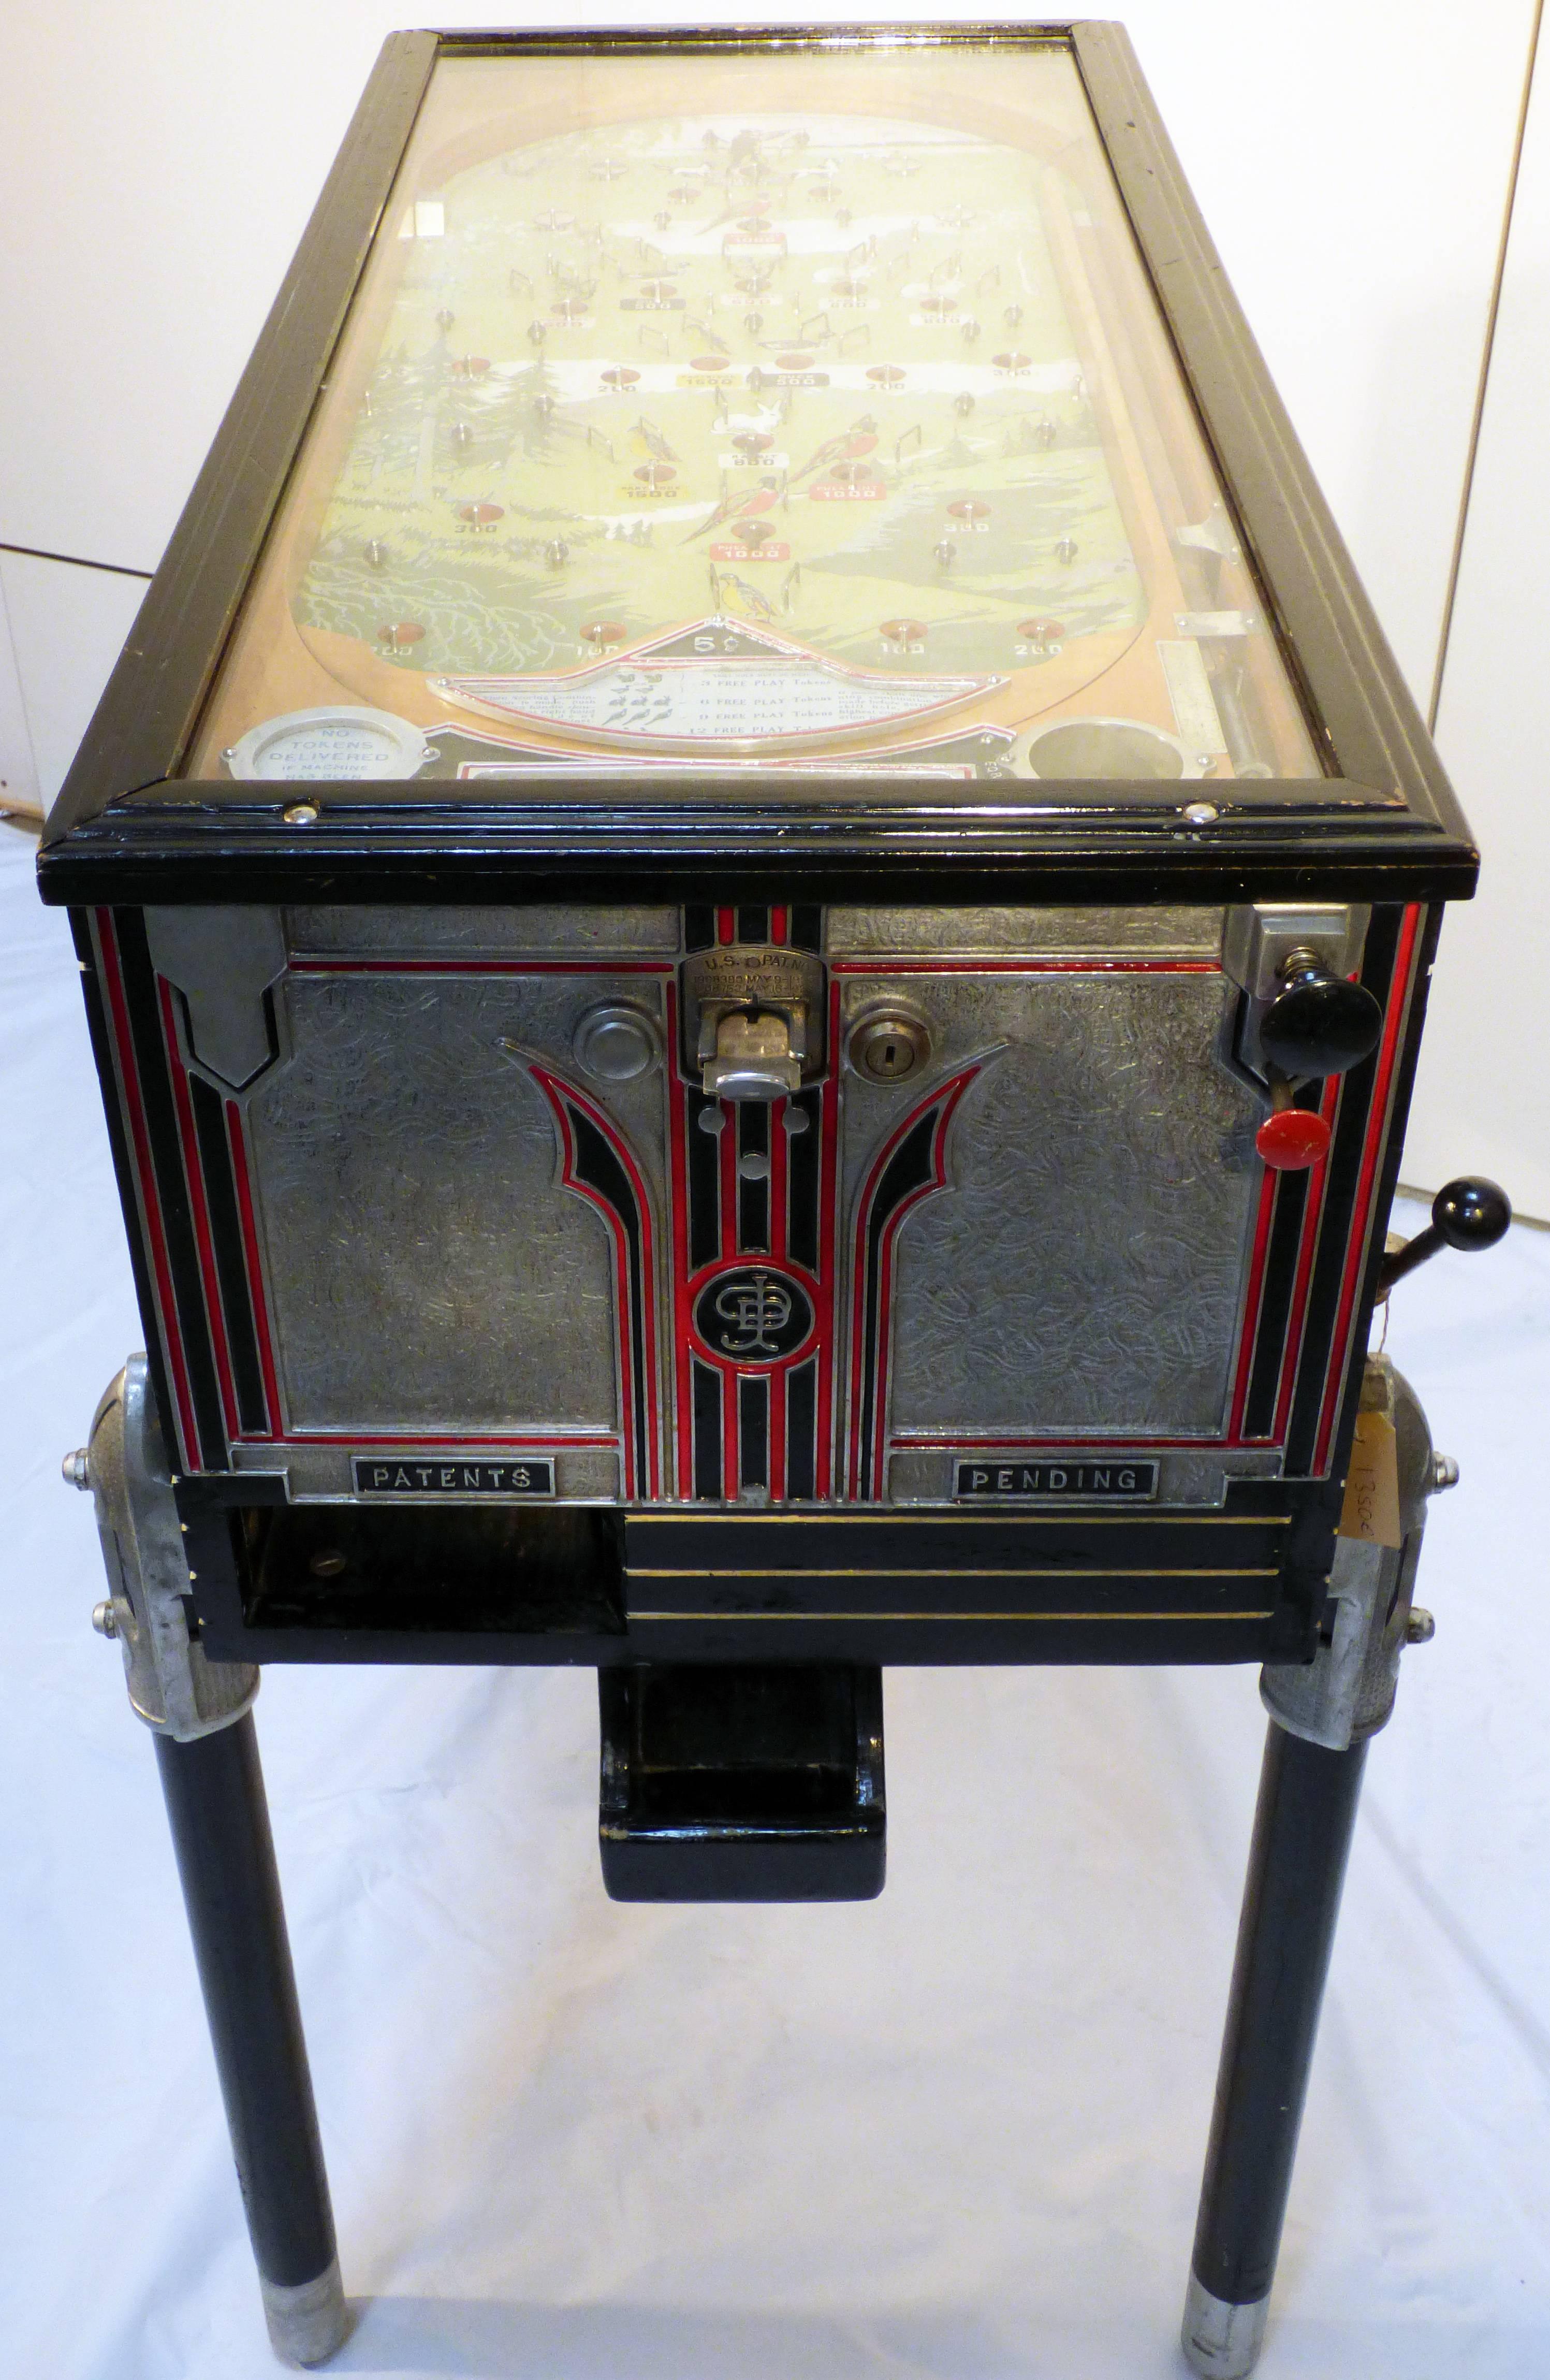 Wonderful pinball machine in very good optical condition and very unique eye-catcher in Art Deco style.

The mechanics do not work completely and not to be restored to play the pinball machine.

For shipping costs, just send us a short message &